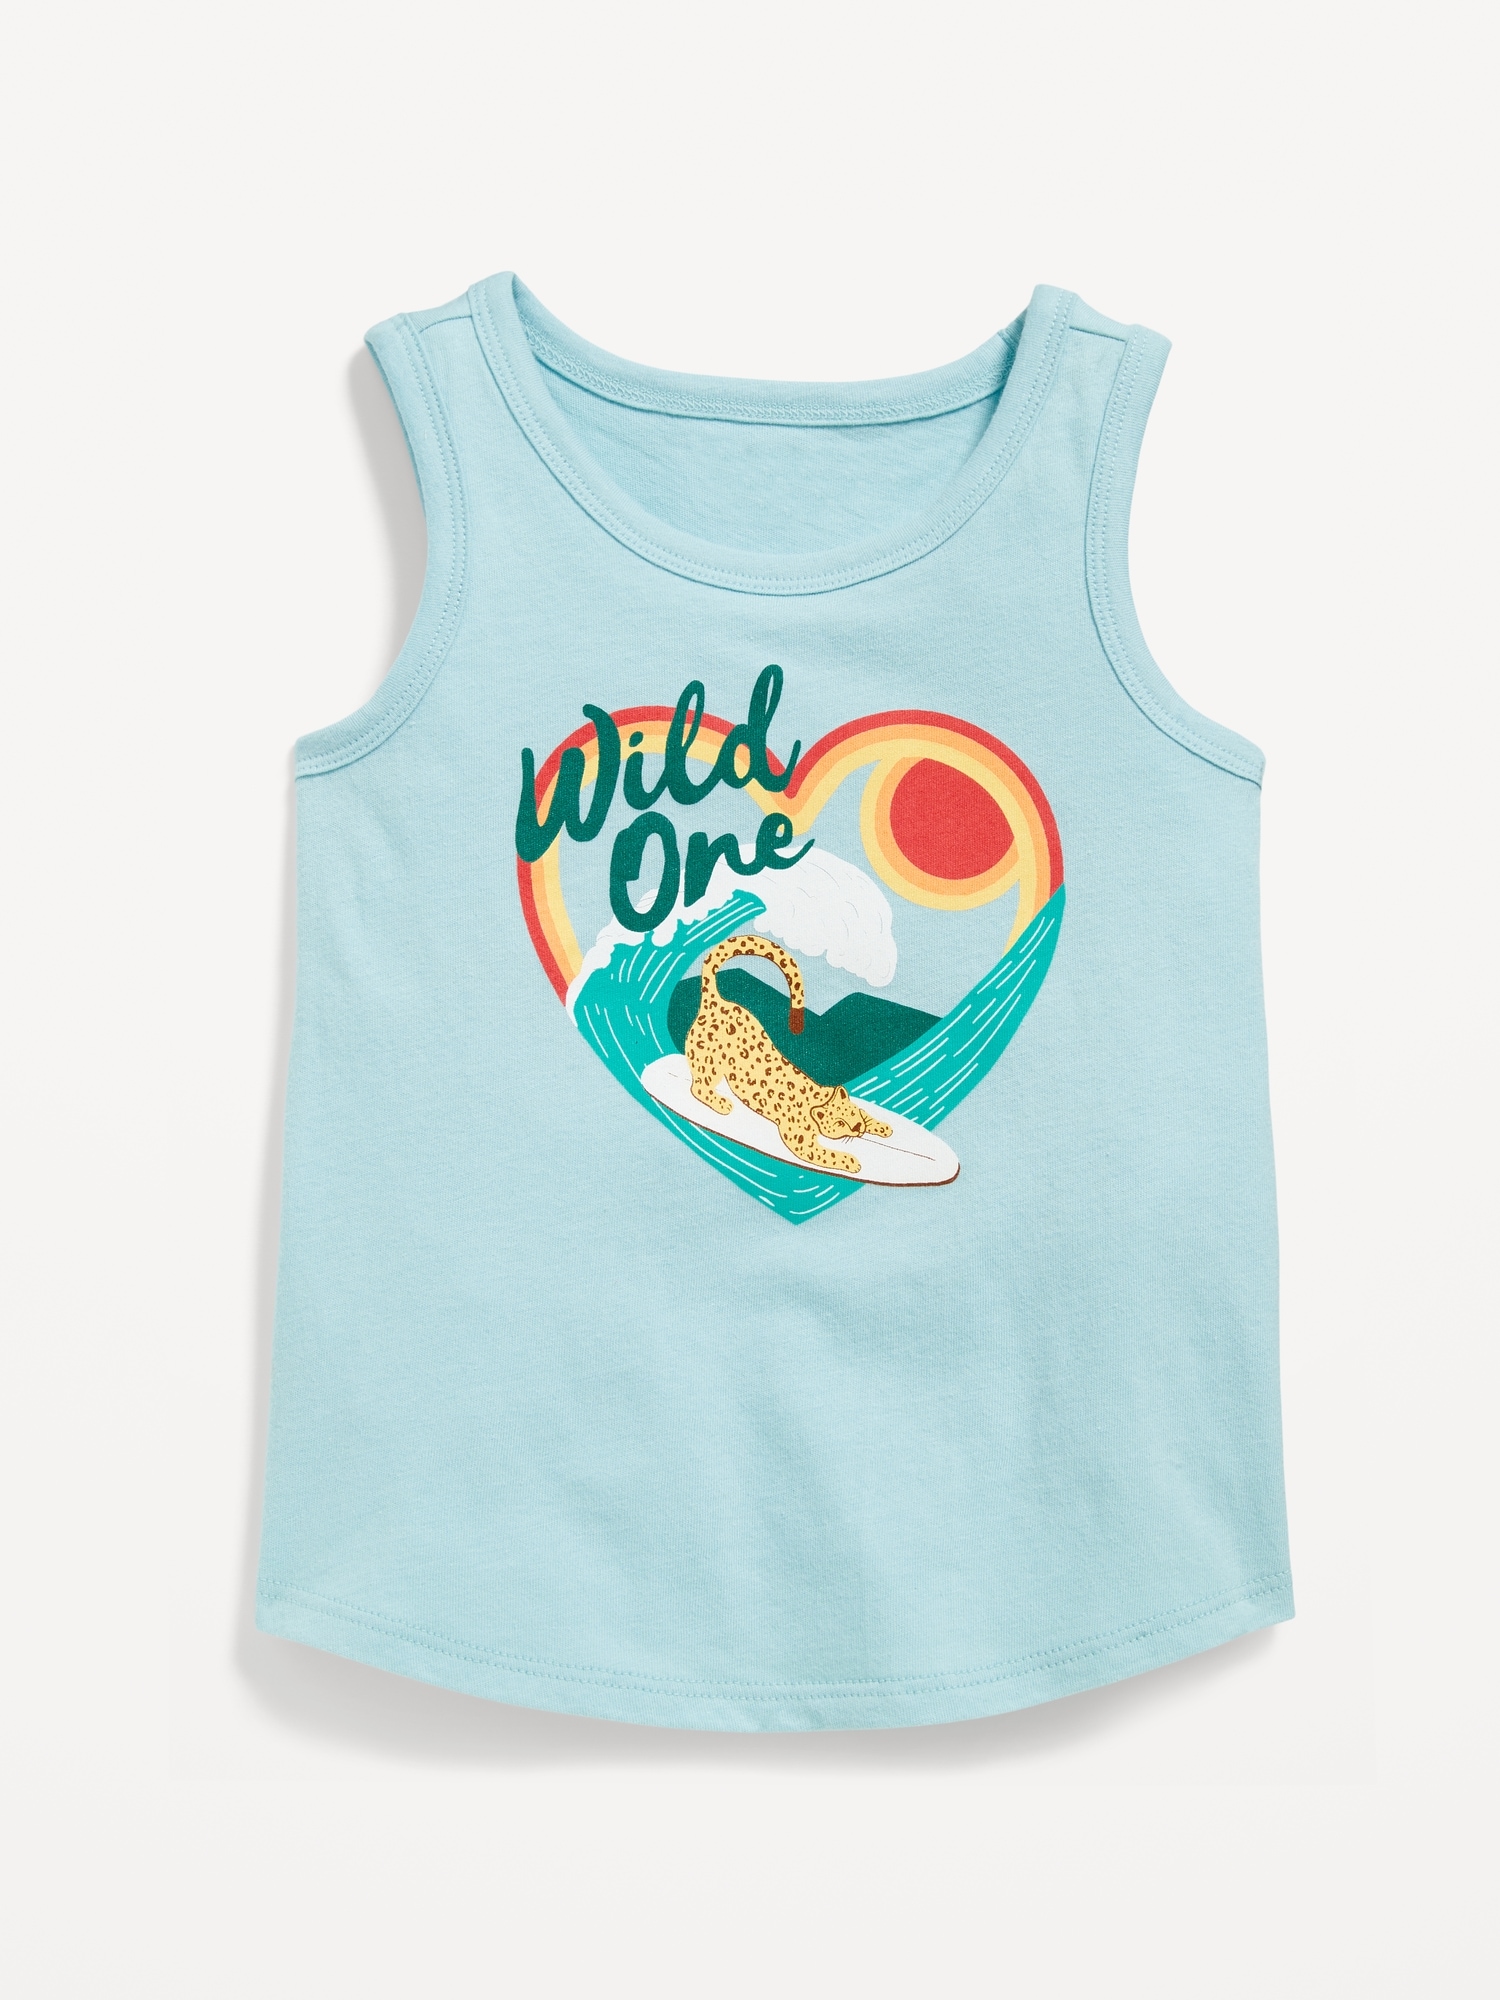 Old Navy Graphic Tank Top for Toddler Girls blue. 1